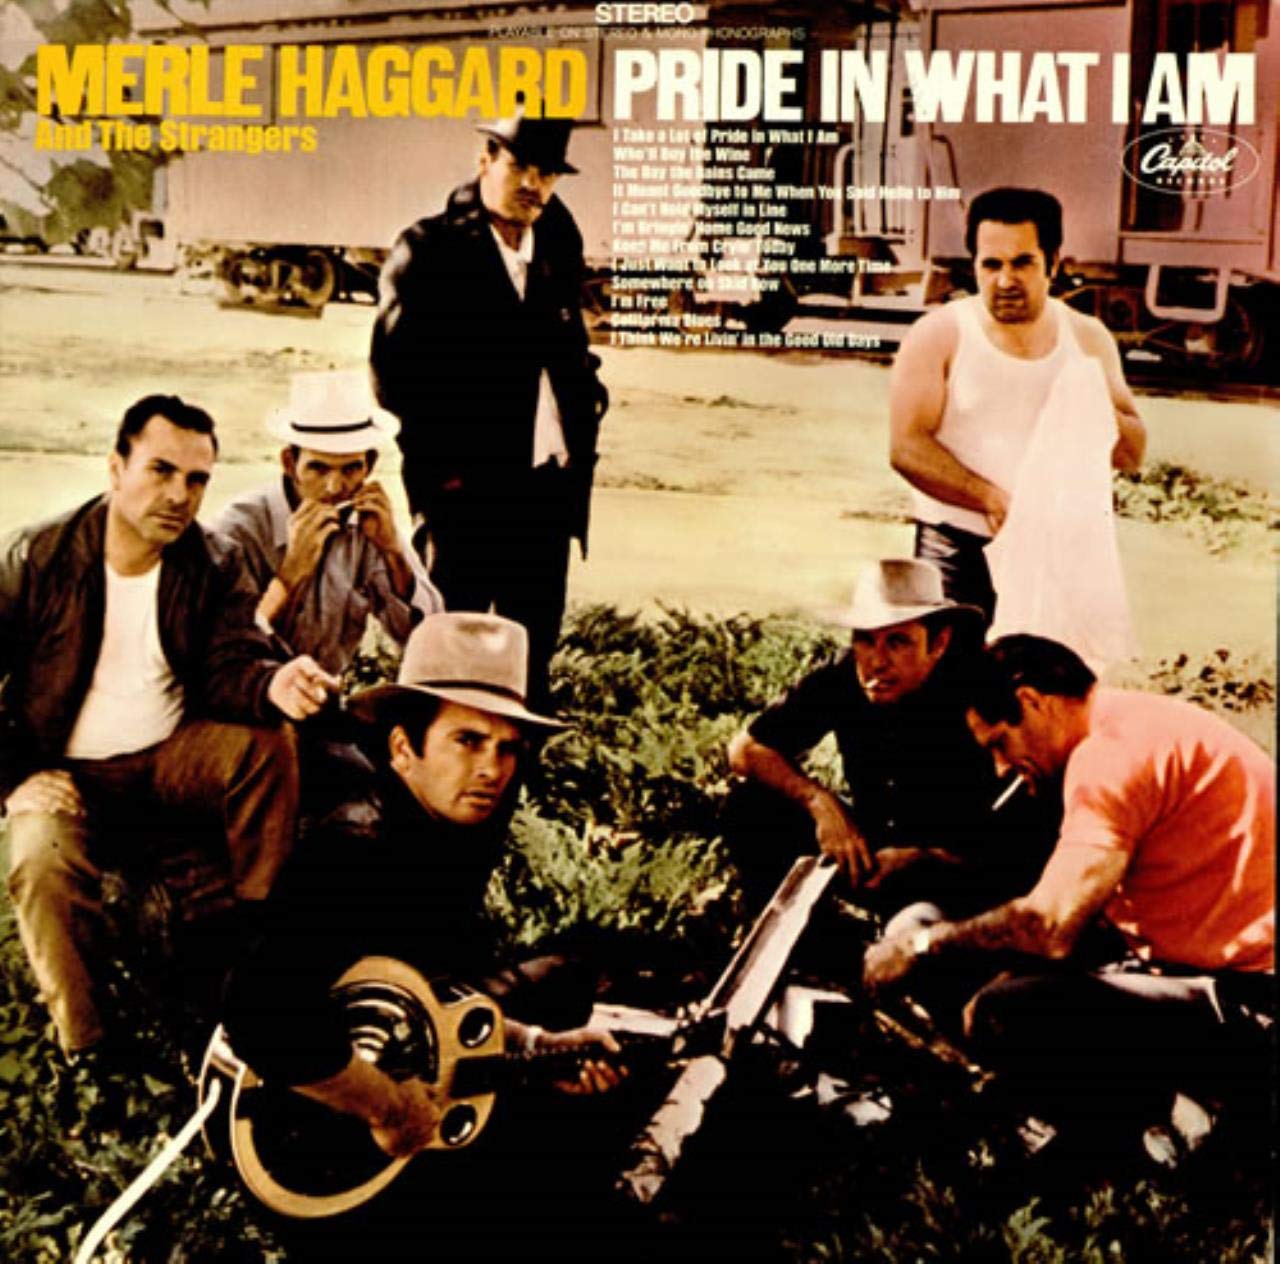 The album, Pride In What I Am, released February 10, 1969, finishing at #11.